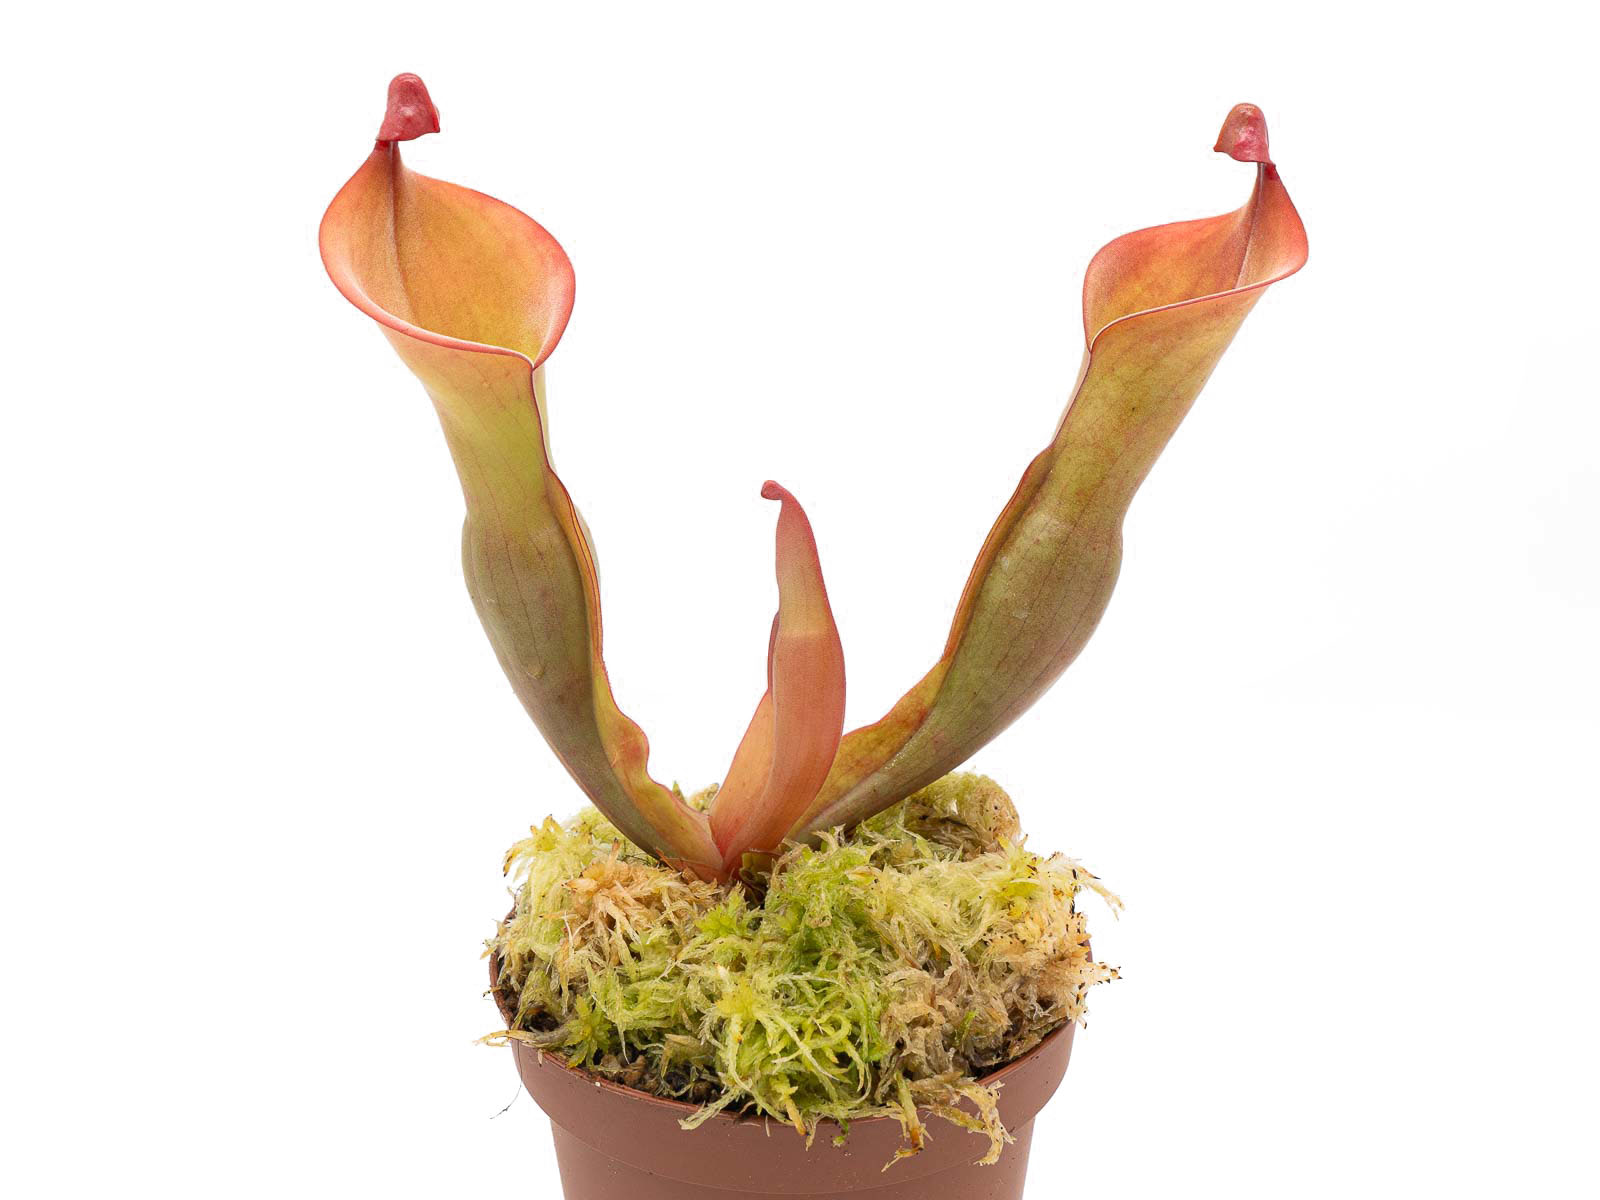 Heliamphora nutans - Giant, the original clone from Michael Schach